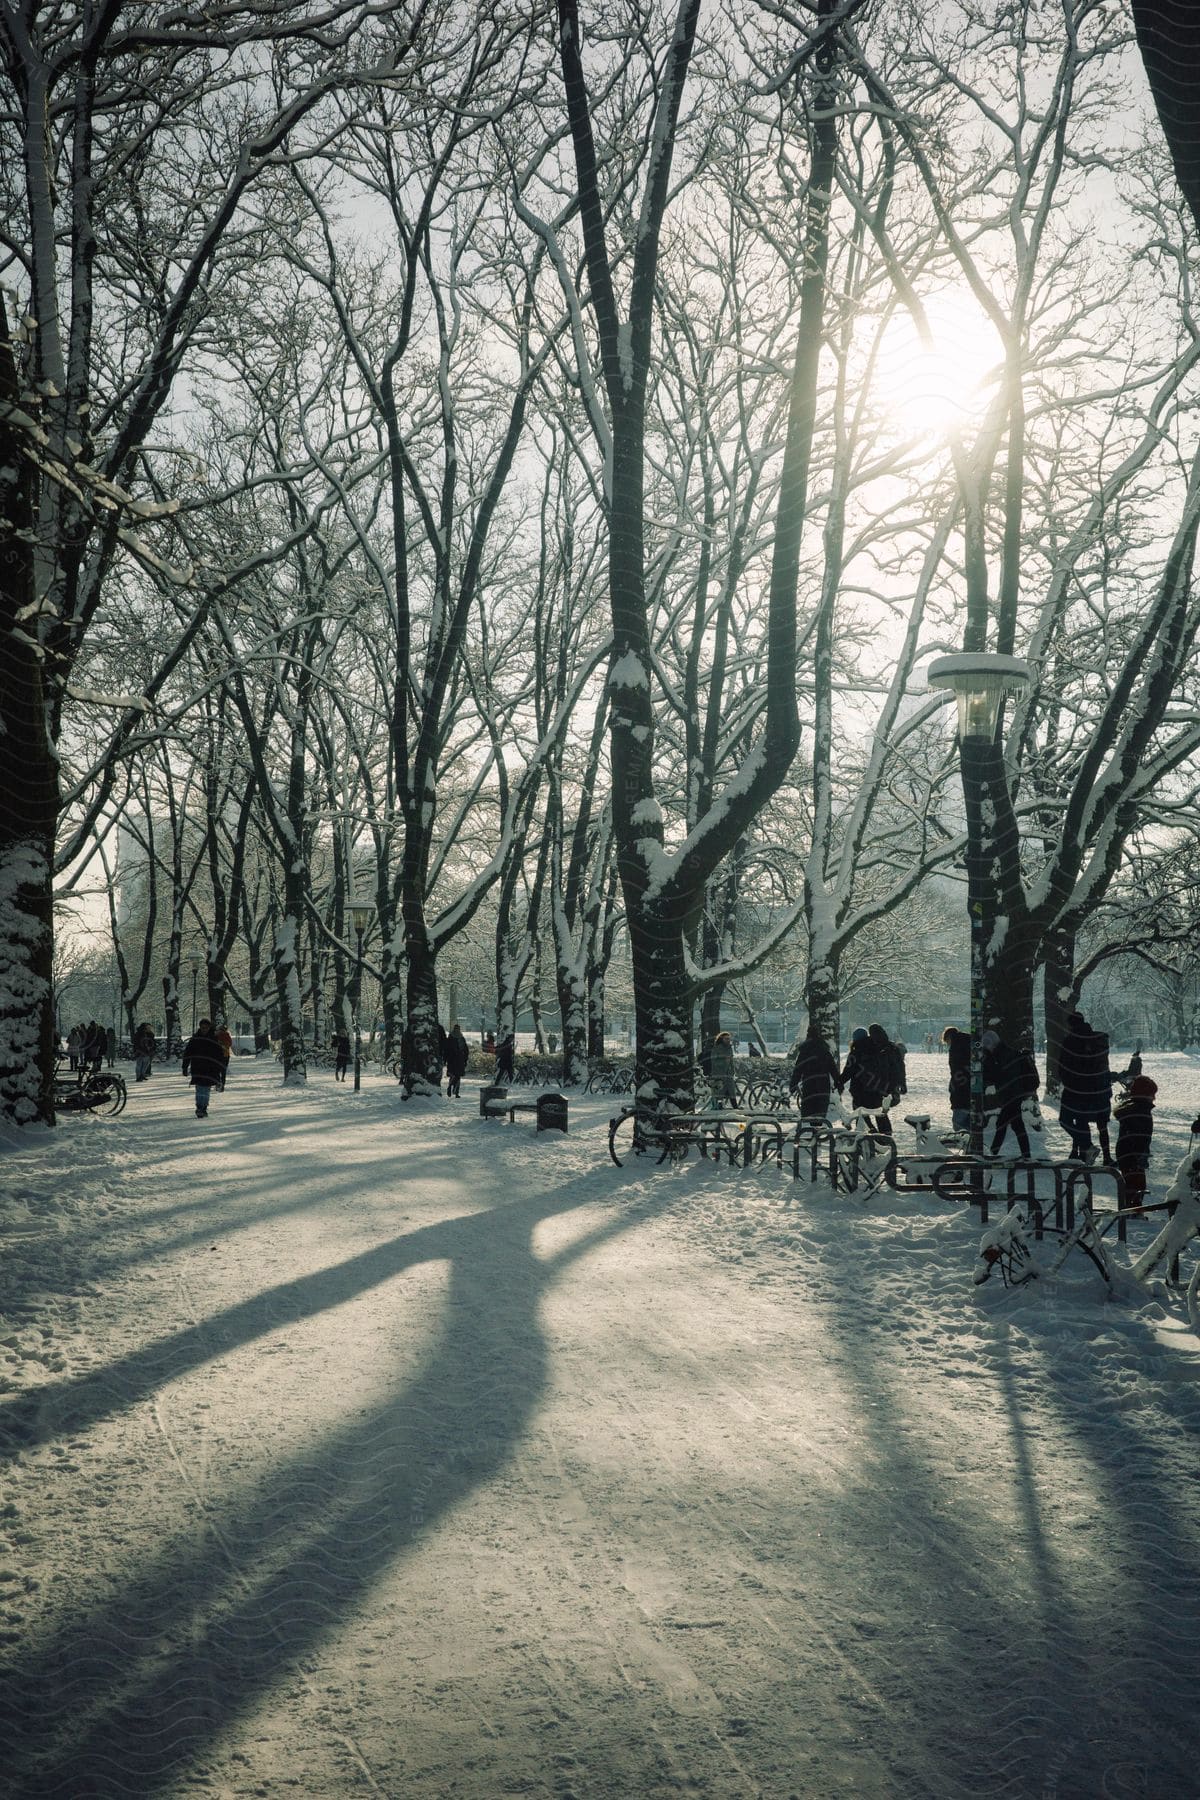 People walking in a snow covered park on a winter day